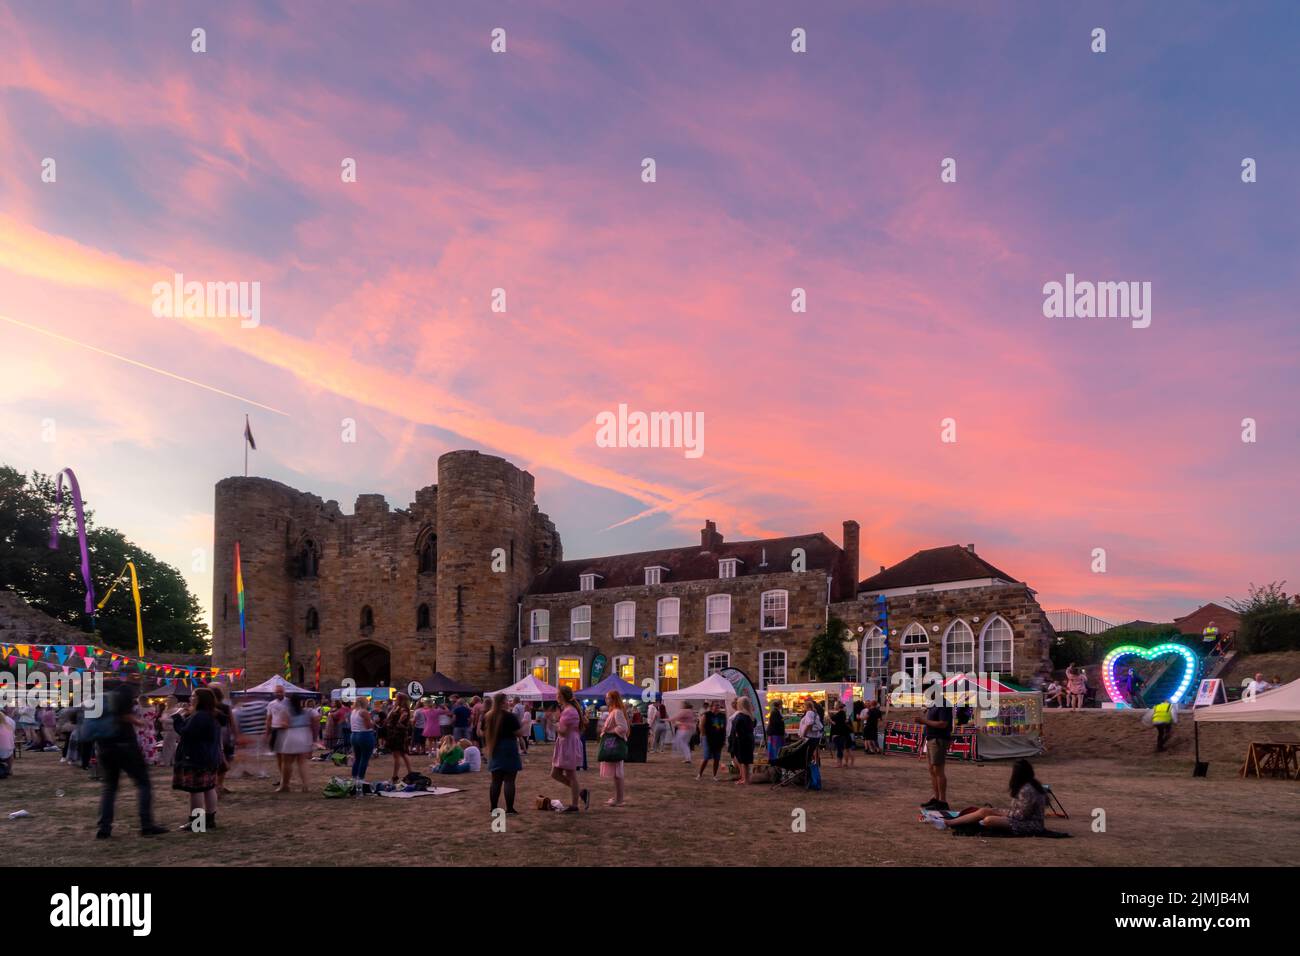 Tonbridge, Kent, England. 06 August 2022. The Tonbridge Pride inaugural event held on the lawn in front of Tonbridge Castle where all love is celebrated on a summers evening as the sun set over the castle ©Sarah Mott / Alamy Live News, Stock Photo